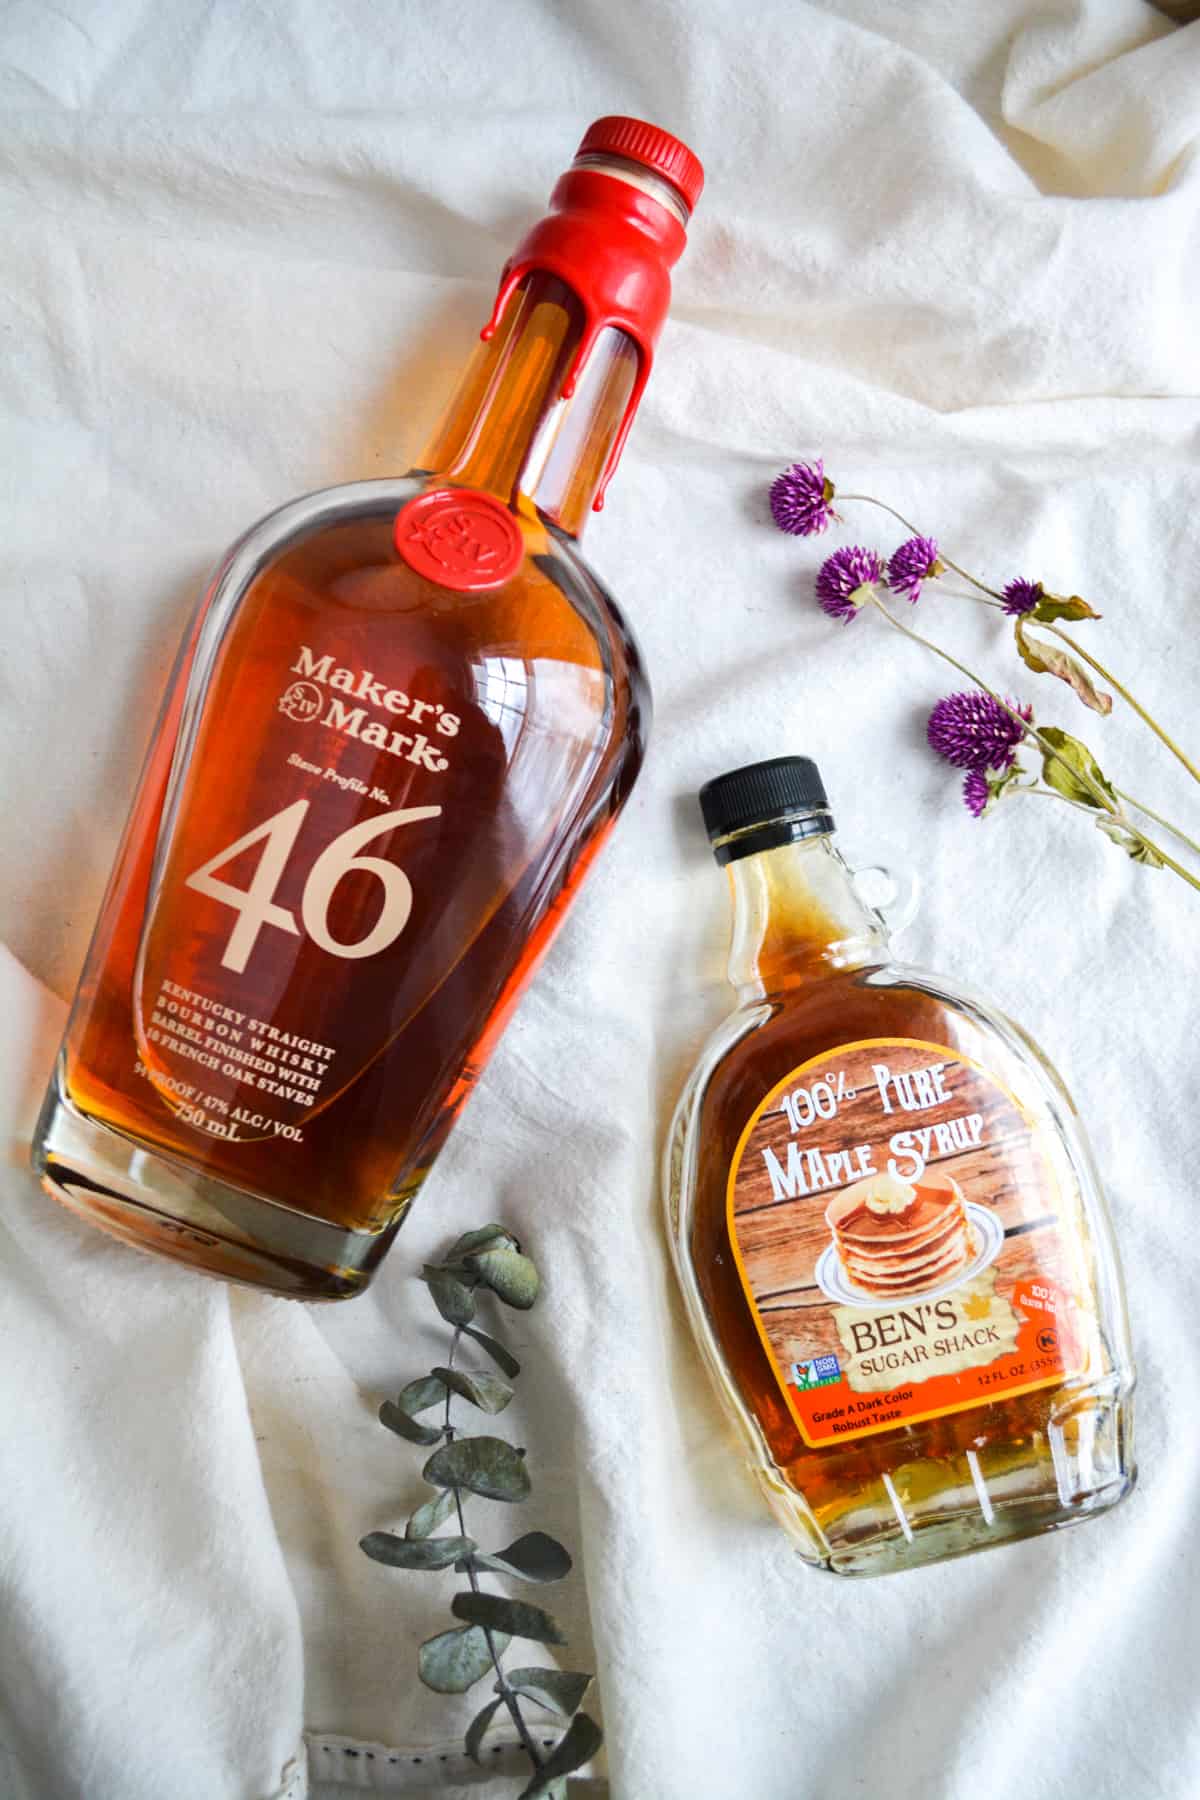 A bottle of Makers 46 and syrup on a cloth